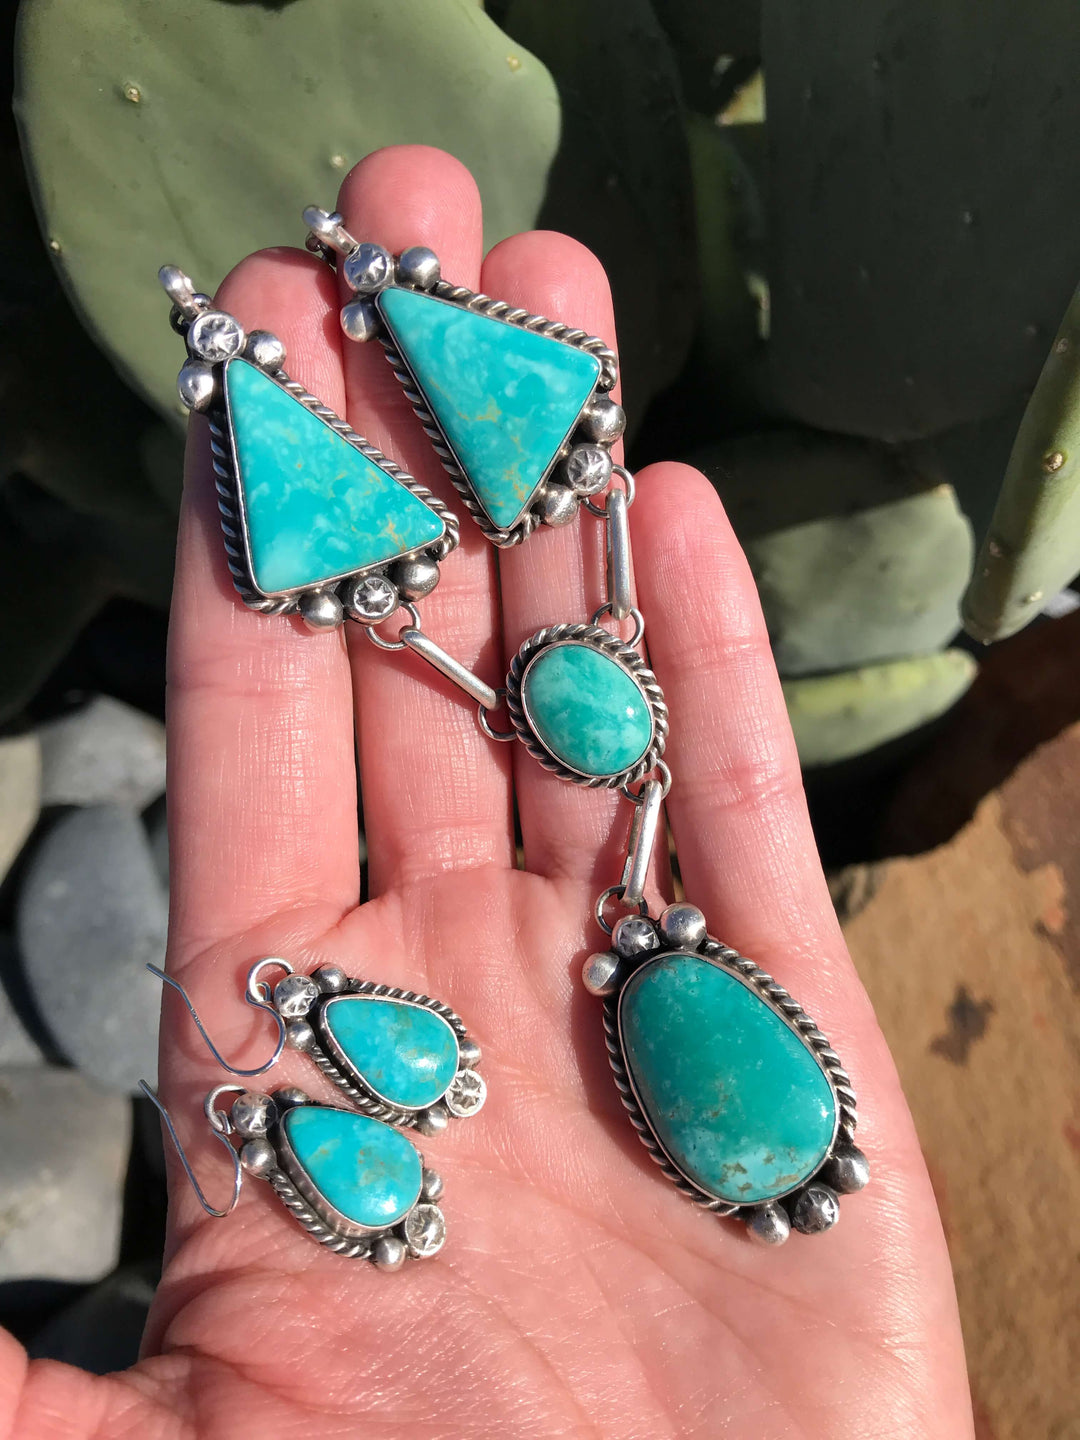 The Almayo Turquoise Lariat Necklace Set-Necklaces-Calli Co., Turquoise and Silver Jewelry, Native American Handmade, Zuni Tribe, Navajo Tribe, Brock Texas